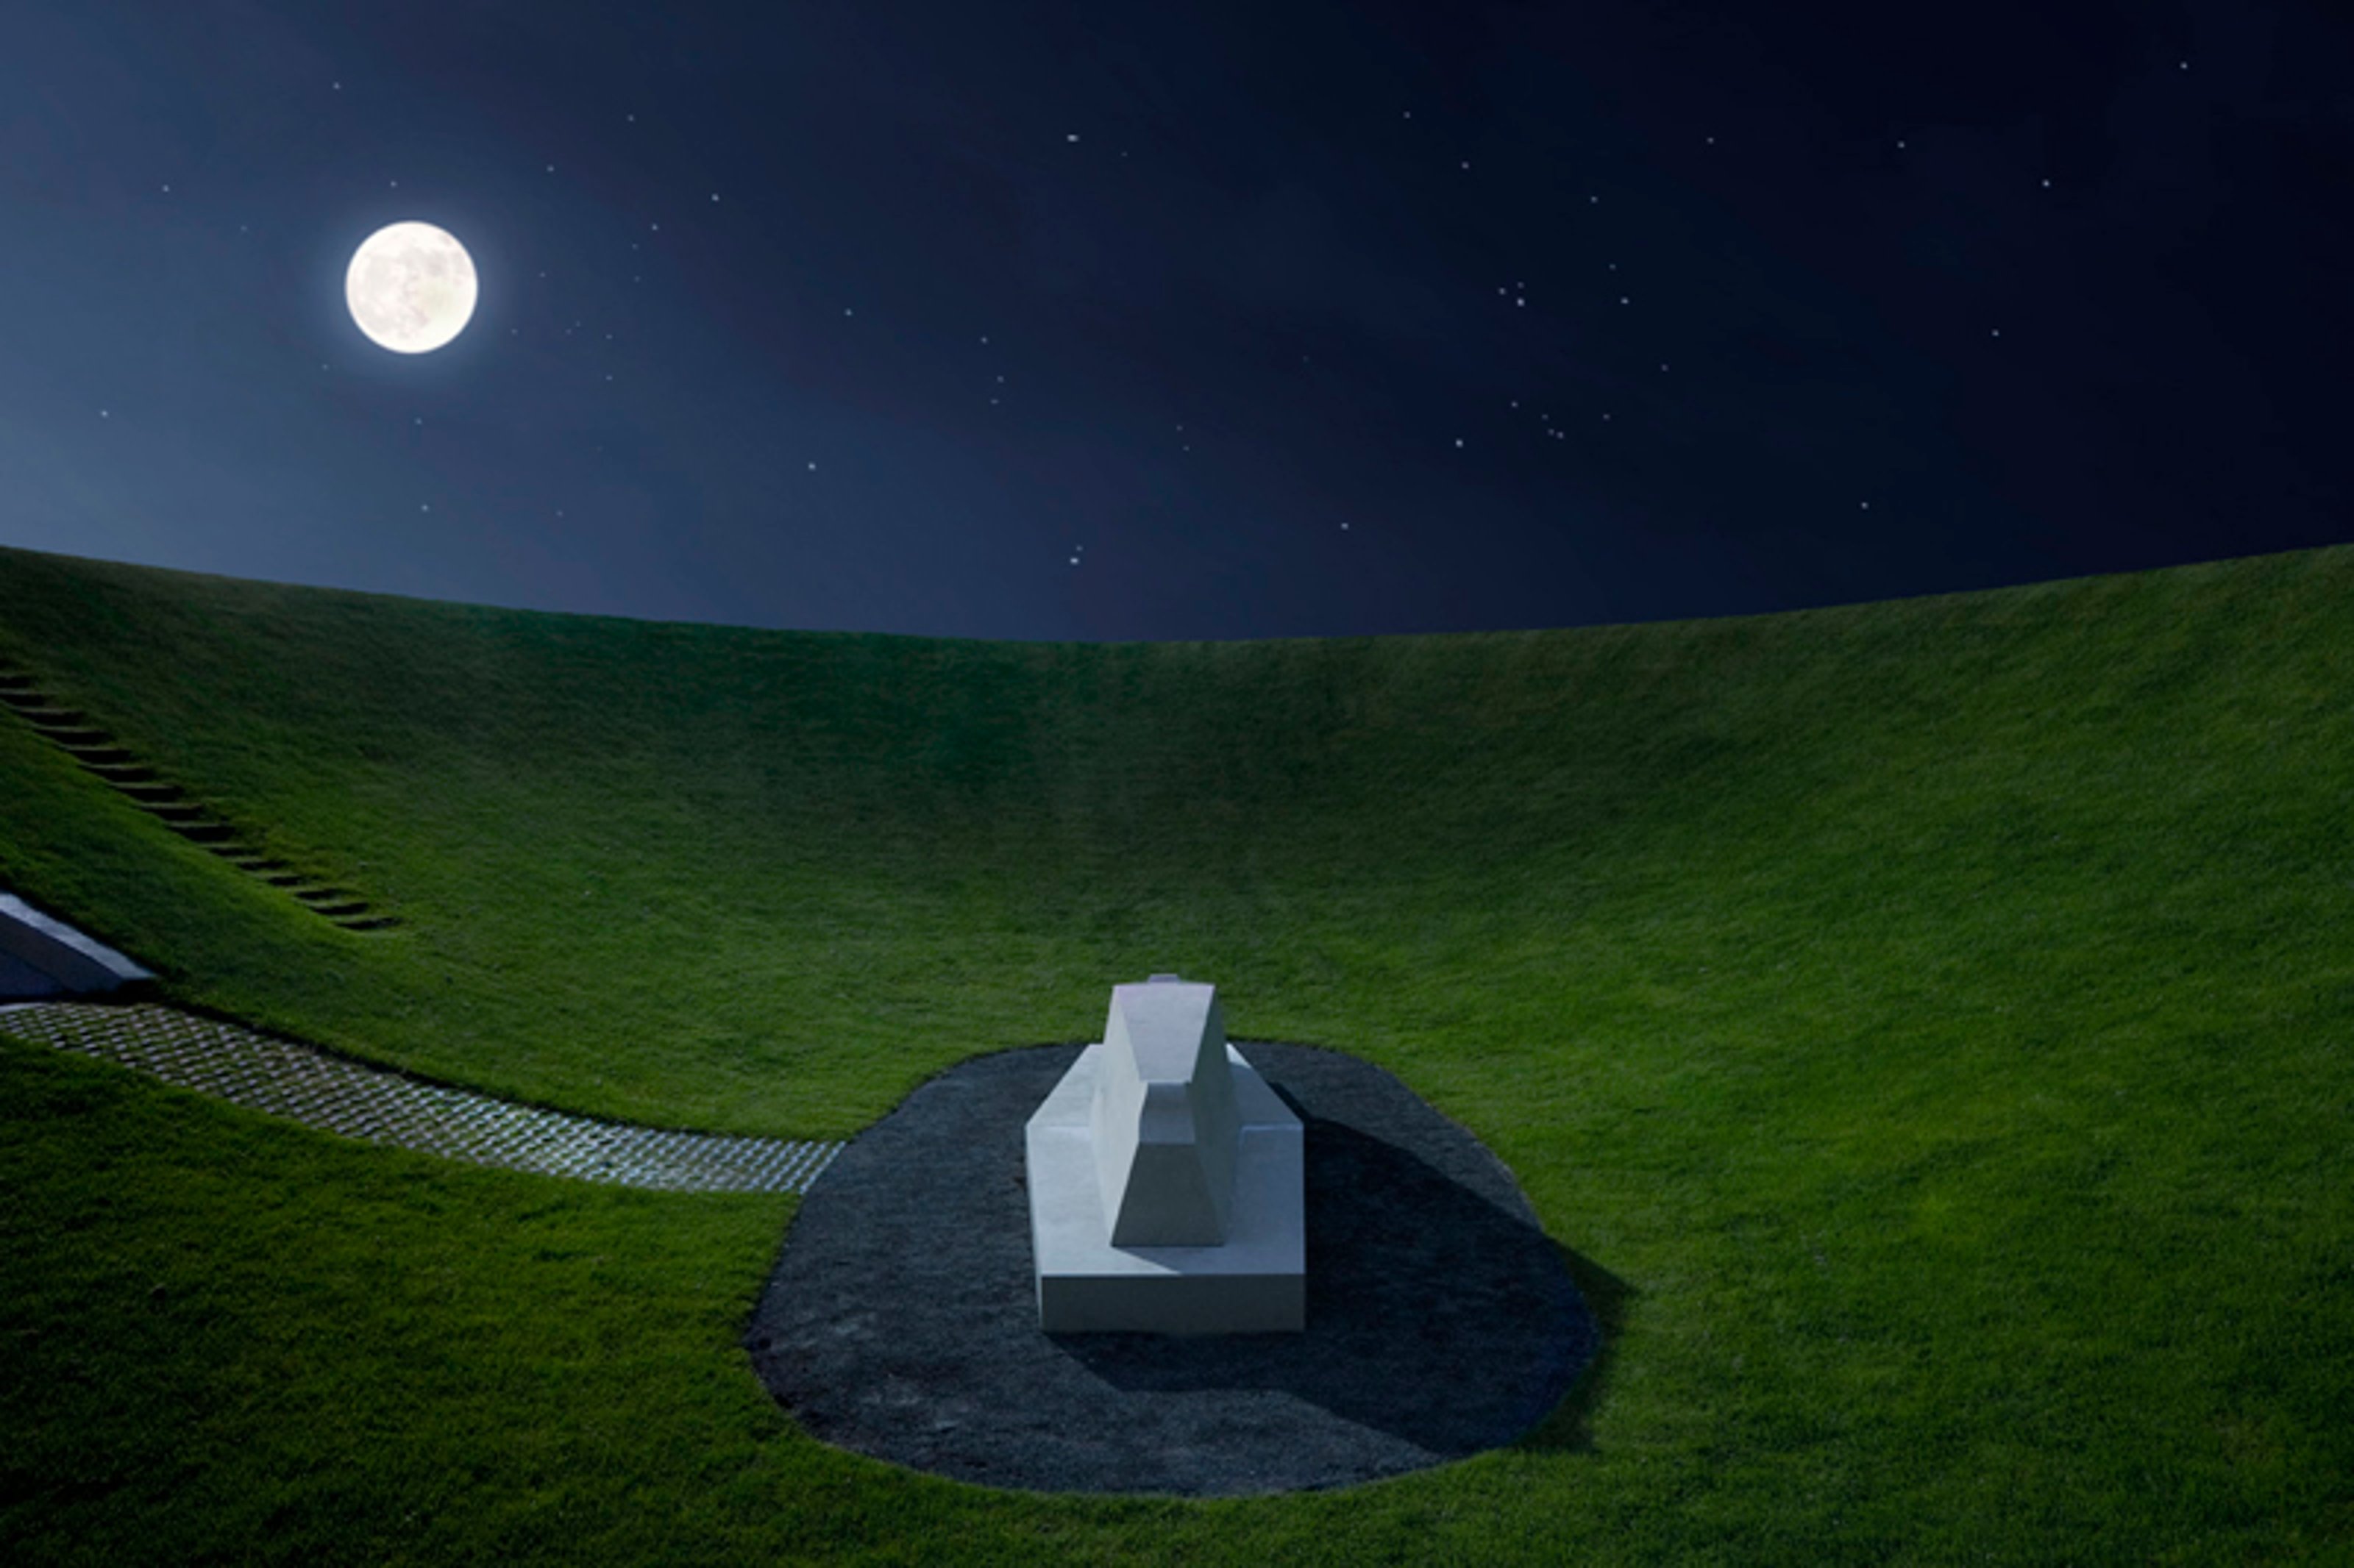 A white cemetery monument surrounded by moonlit grass in the night.